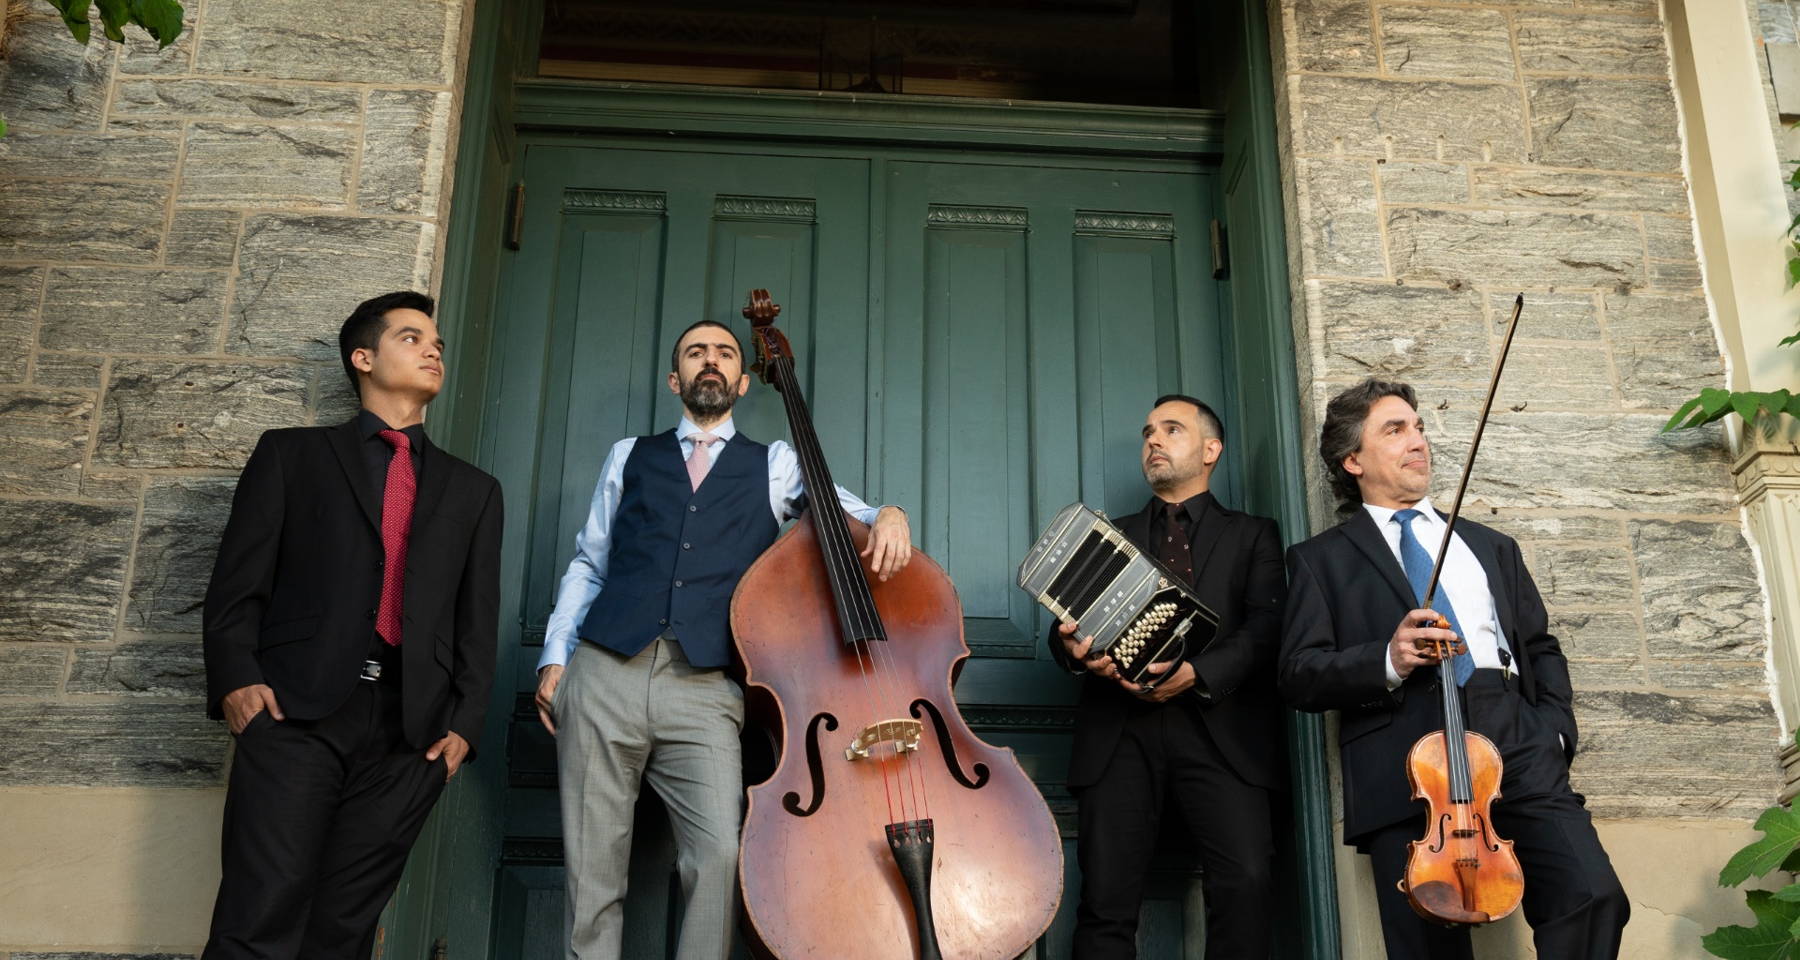  A New Direction for Spring . . .  Argentinian tango, folk, jazz, and more . . . Pedro Giraudo Quartet in a West Village townhouse